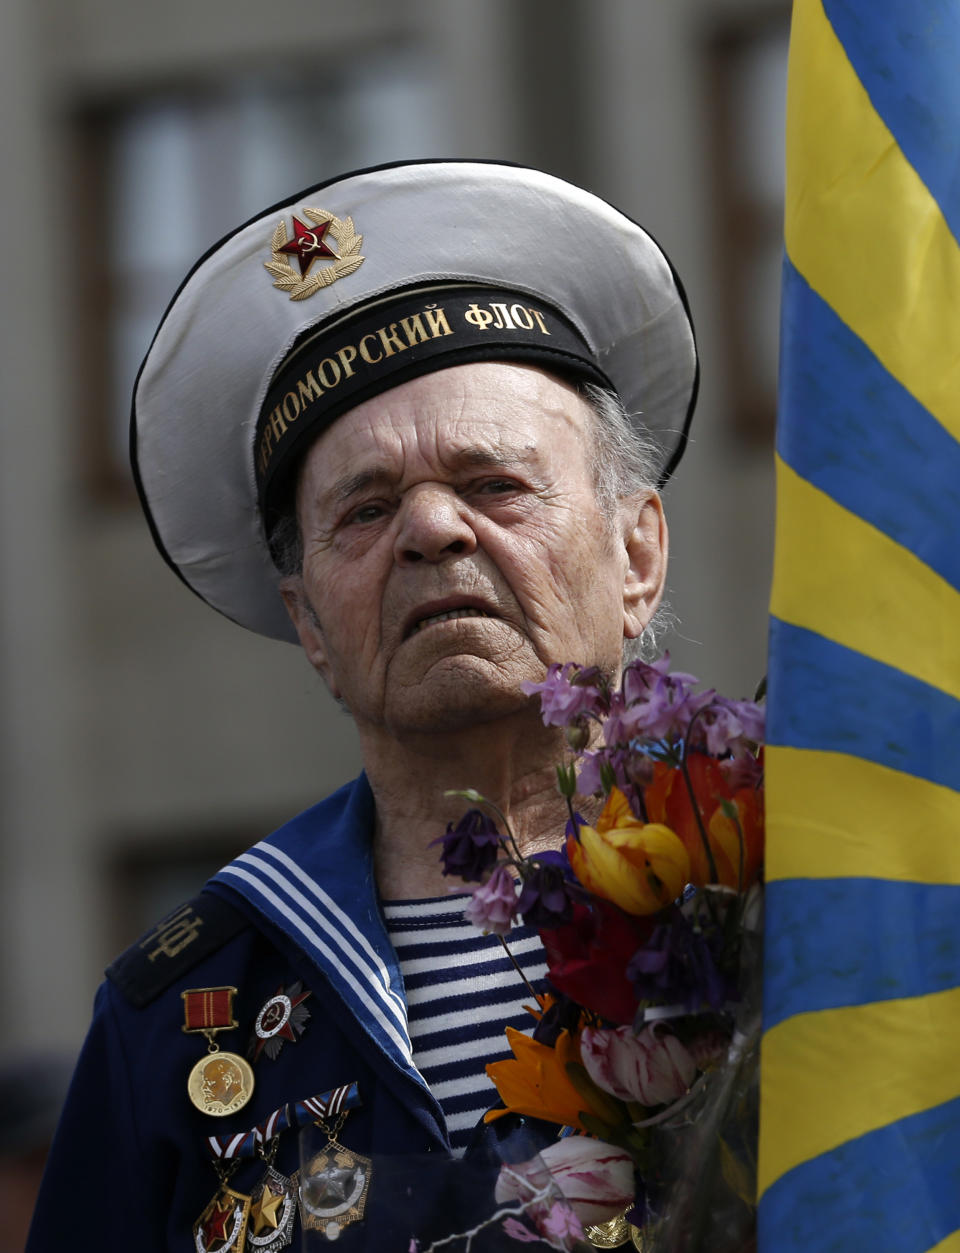 A World War II veteran attends a Victory Day celebration, which commemorates the 1945 defeat of Nazi Germany, in the center of Slovyansk, eastern Ukraine, Friday, May 9, 2014. Putin's surprise call on Wednesday for delaying the referendum in eastern Ukraine appeared to reflect Russia's desire to distance itself from the separatists as it bargains with the West over a settlement to the Ukrainian crisis. But insurgents in the Russian-speaking east defied Putin's call and said they would go ahead with the referendum. (AP Photo/Darko Vojinovic)